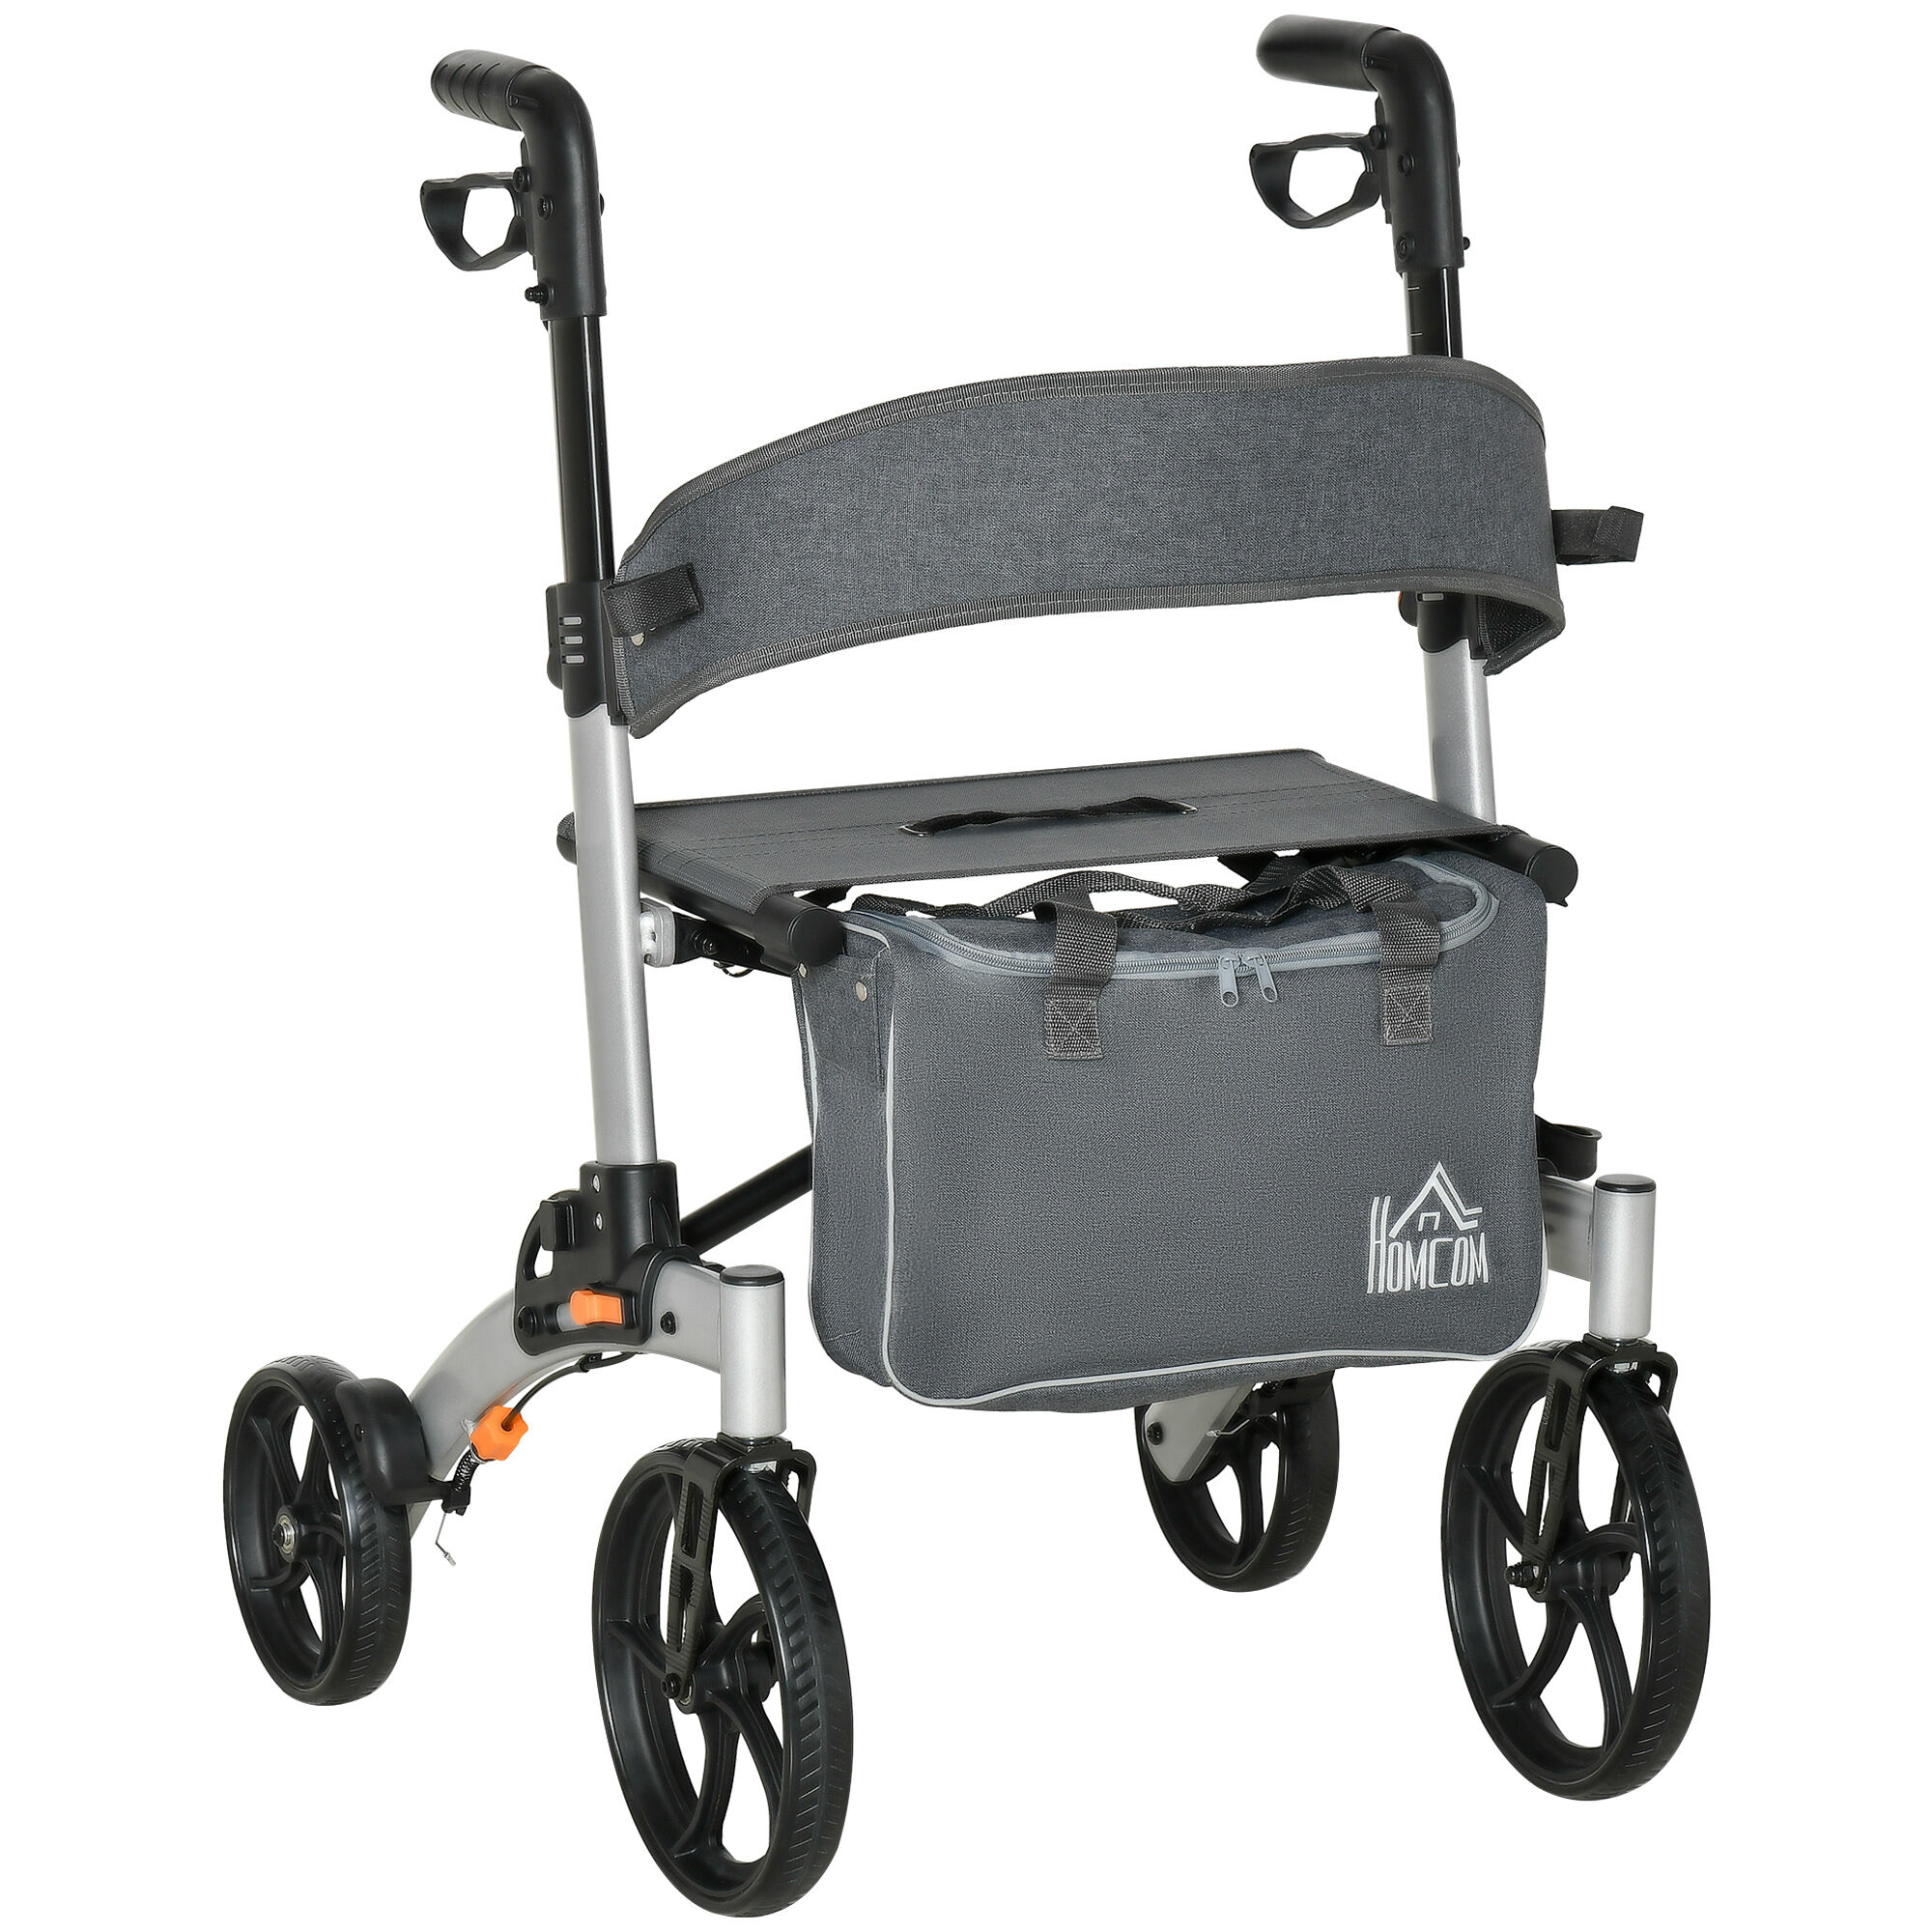 HOMCOM Rollator Walker with Seat for Senior, Upright Walker with 10" PVC Wheels and Hand Brake, Aluminum Rollator with Storage Basket, Silver